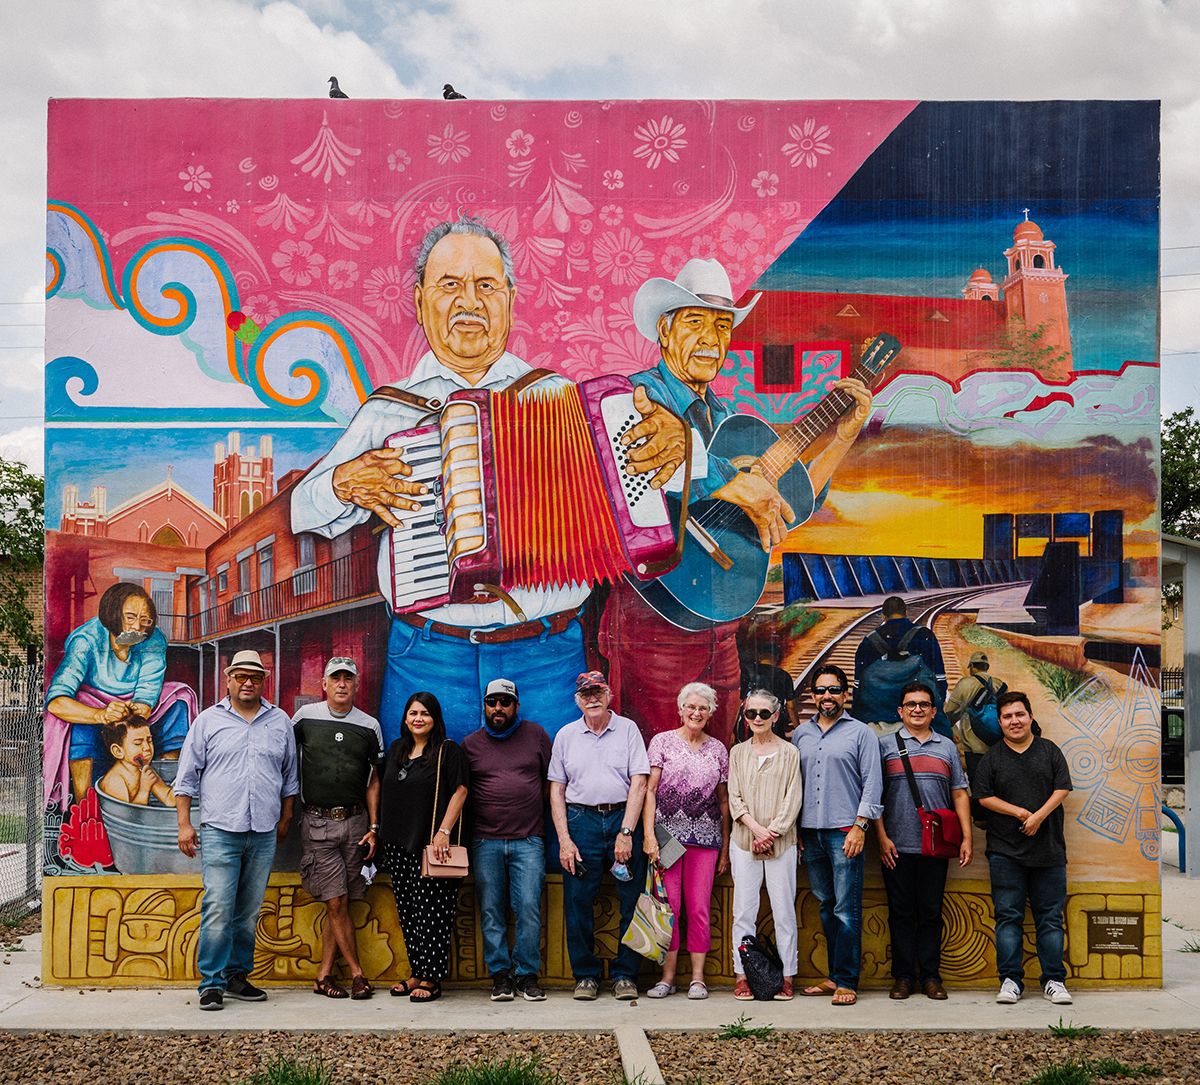 Christopher Tirres and colleagues from an educational Delegation pose in front of a mural by celebrated El Paso artist Jesús “Cimi” Alvarado.